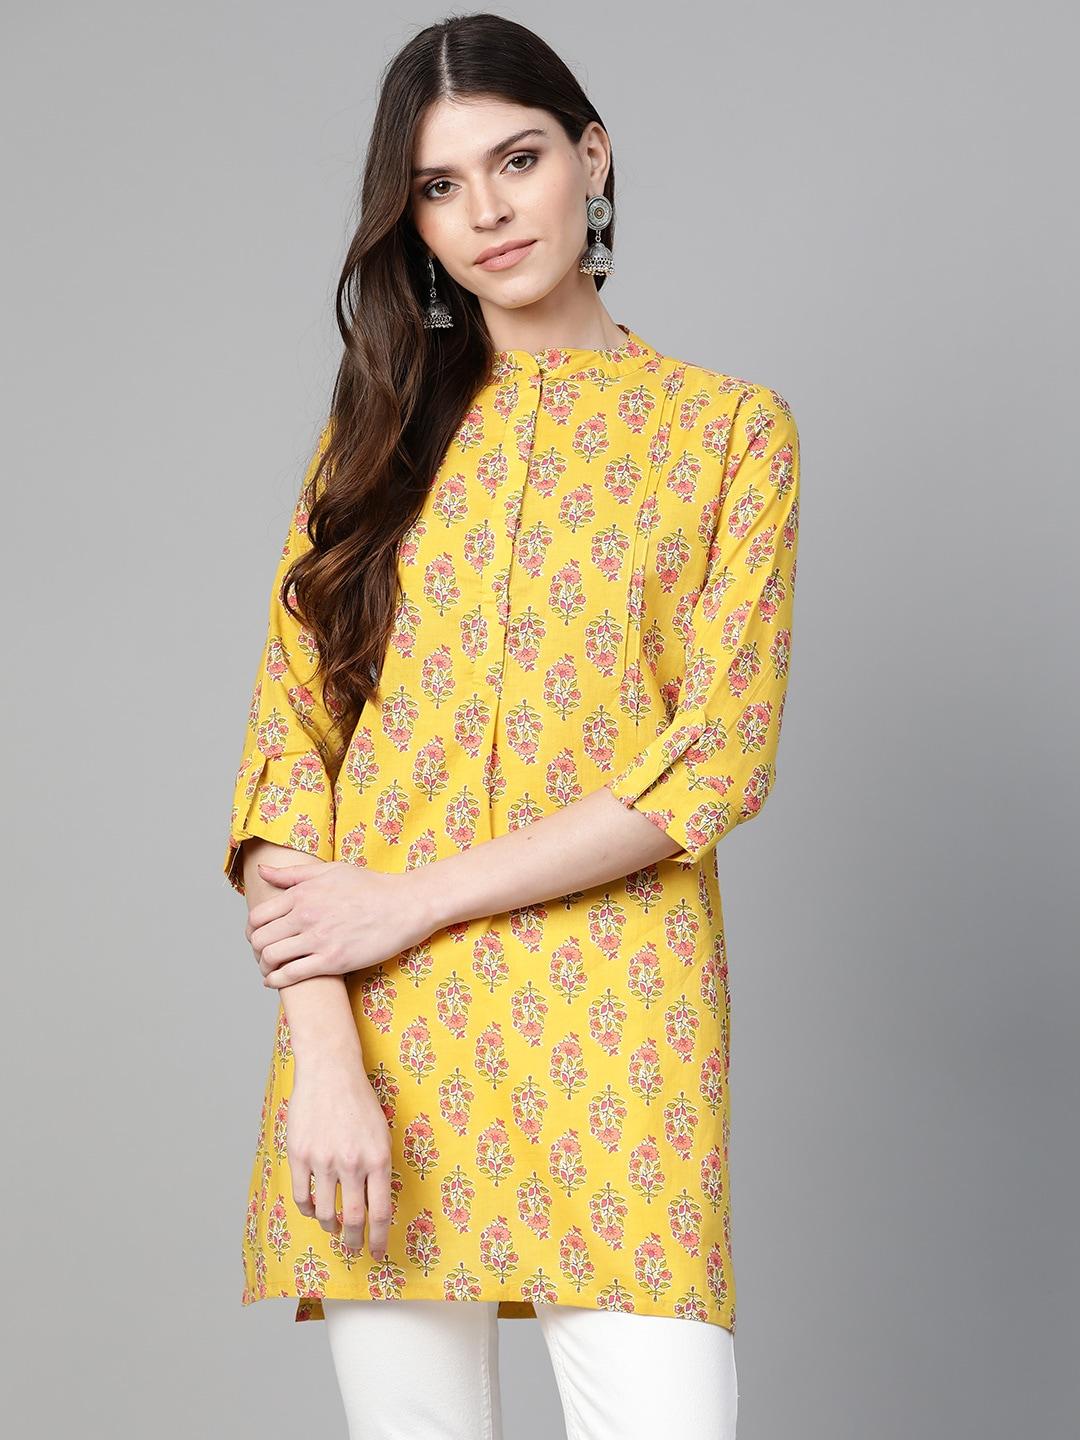 Bhama Couture Women Mustard Yellow & Pink Floral Print Tunic